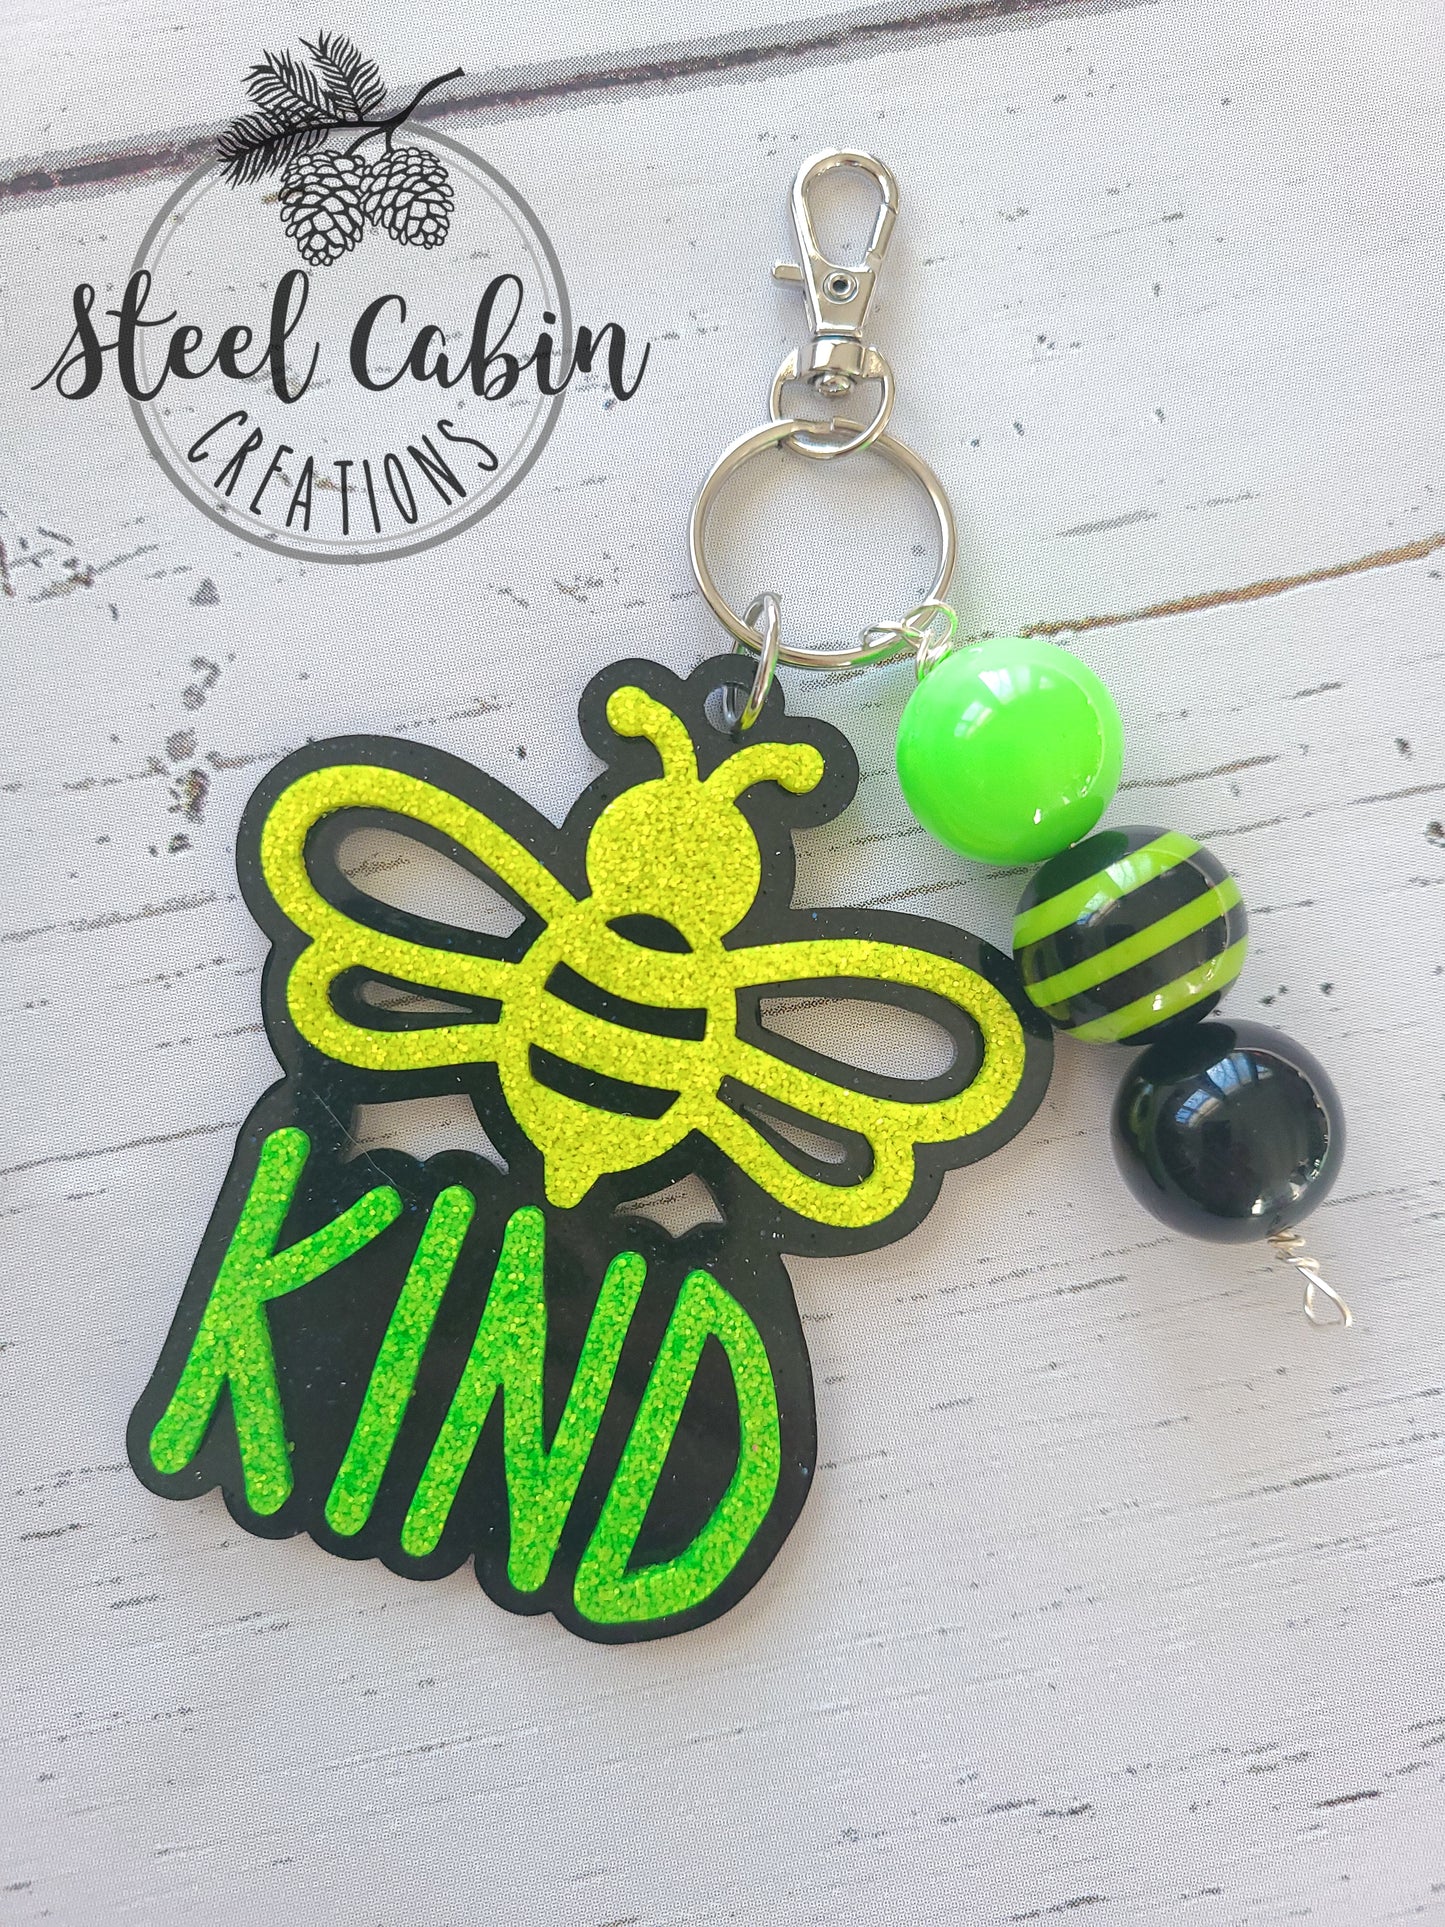 Bee Kind - Keychain - Multiple Colors Available